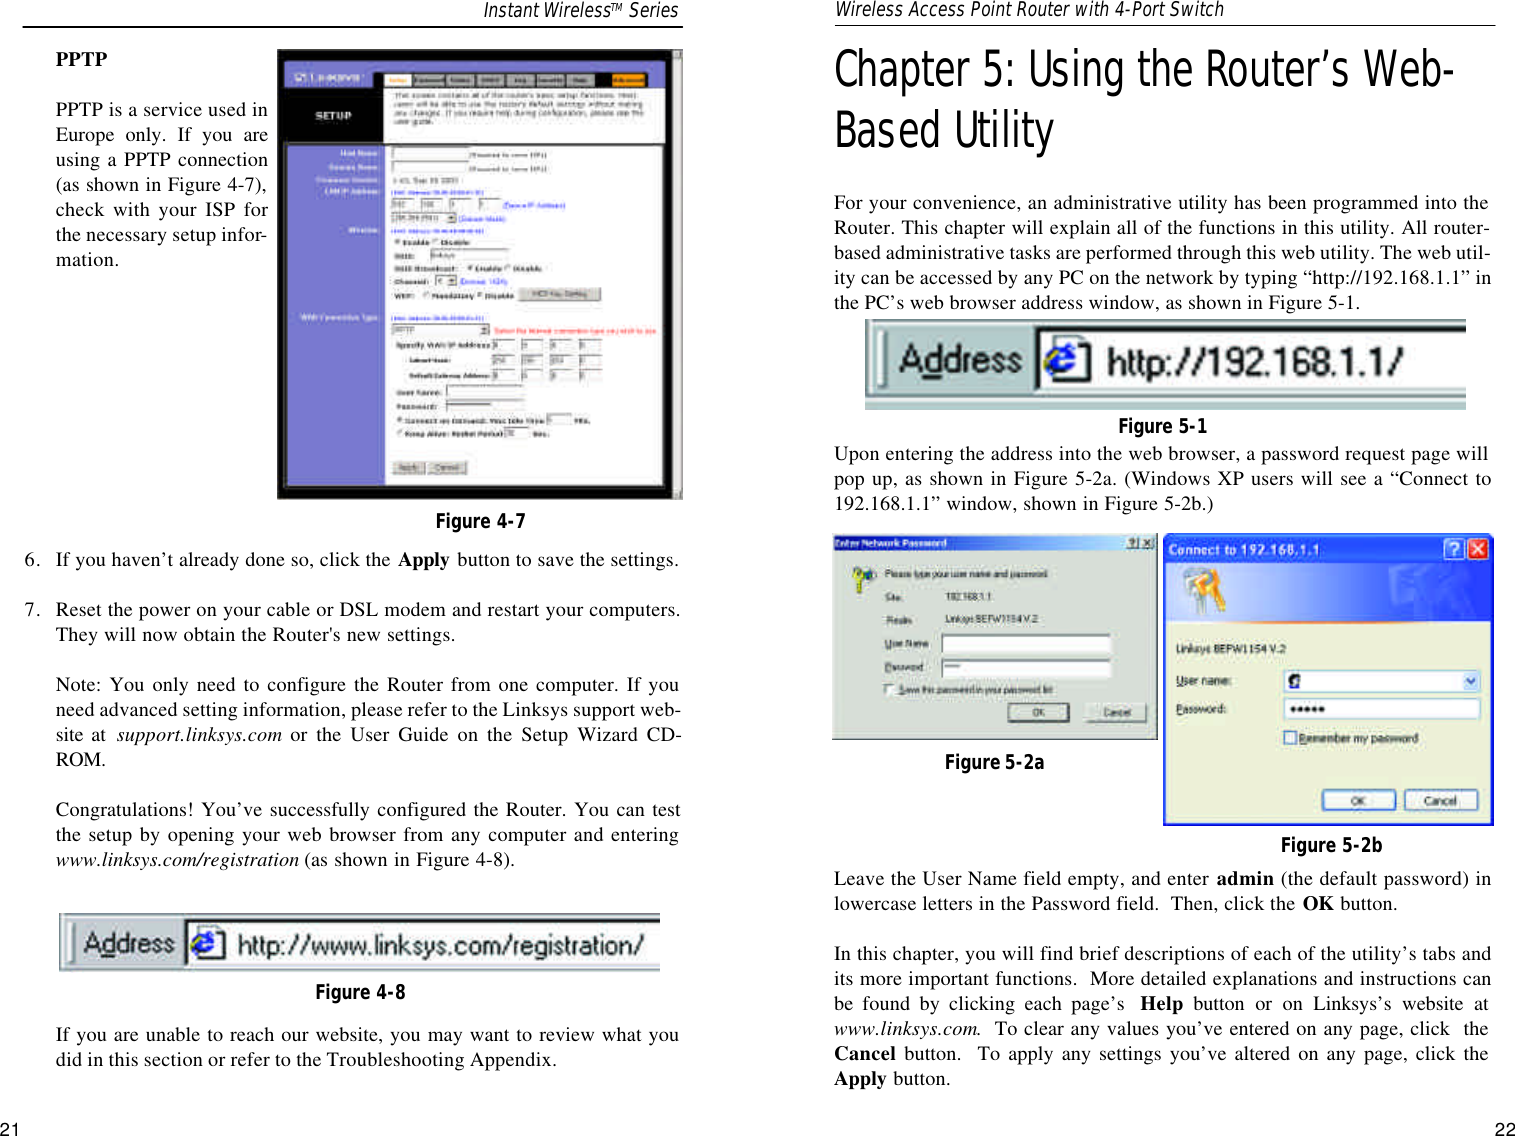 Chapter 5: Using the Router’s Web-Based UtilityFor your convenience, an administrative utility has been programmed into theRouter. This chapter will explain all of the functions in this utility. All router-based administrative tasks are performed through this web utility. The web util-ity can be accessed by any PC on the network by typing “http://192.168.1.1” inthe PC’s web browser address window, as shown in Figure 5-1.Upon entering the address into the web browser, a password request page willpop up, as shown in Figure 5-2a. (Windows XP users will see a “Connect to192.168.1.1” window, shown in Figure 5-2b.)Leave the User Name field empty, and enter admin (the default password) inlowercase letters in the Password field.  Then, click the OK button. In this chapter, you will find brief descriptions of each of the utility’s tabs andits more important functions.  More detailed explanations and instructions canbe found by clicking each page’s  Help button or on Linksys’s website atwww.linksys.com.  To clear any values you’ve entered on any page, click  theCancel button.  To apply any settings you’ve altered on any page, click theApply button.21PPTPPPTP is a service used inEurope only. If you areusing a PPTP connection(as shown in Figure 4-7),check with your ISP forthe necessary setup infor-mation.6. If you haven’t already done so, click the Apply button to save the settings.7. Reset the power on your cable or DSL modem and restart your computers.They will now obtain the Router&apos;s new settings.Note: You only need to configure the Router from one computer. If youneed advanced setting information, please refer to the Linksys support web-site at  support.linksys.com or the User Guide on the Setup Wizard CD-ROM.Congratulations! You’ve successfully configured the Router. You can testthe setup by opening your web browser from any computer and enteringwww.linksys.com/registration (as shown in Figure 4-8).If you are unable to reach our website, you may want to review what youdid in this section or refer to the Troubleshooting Appendix.Figure 4-7Figure 4-8Figure 5-1Figure 5-2aFigure 5-2bInstant WirelessTM Series Wireless Access Point Router with 4-Port Switch22